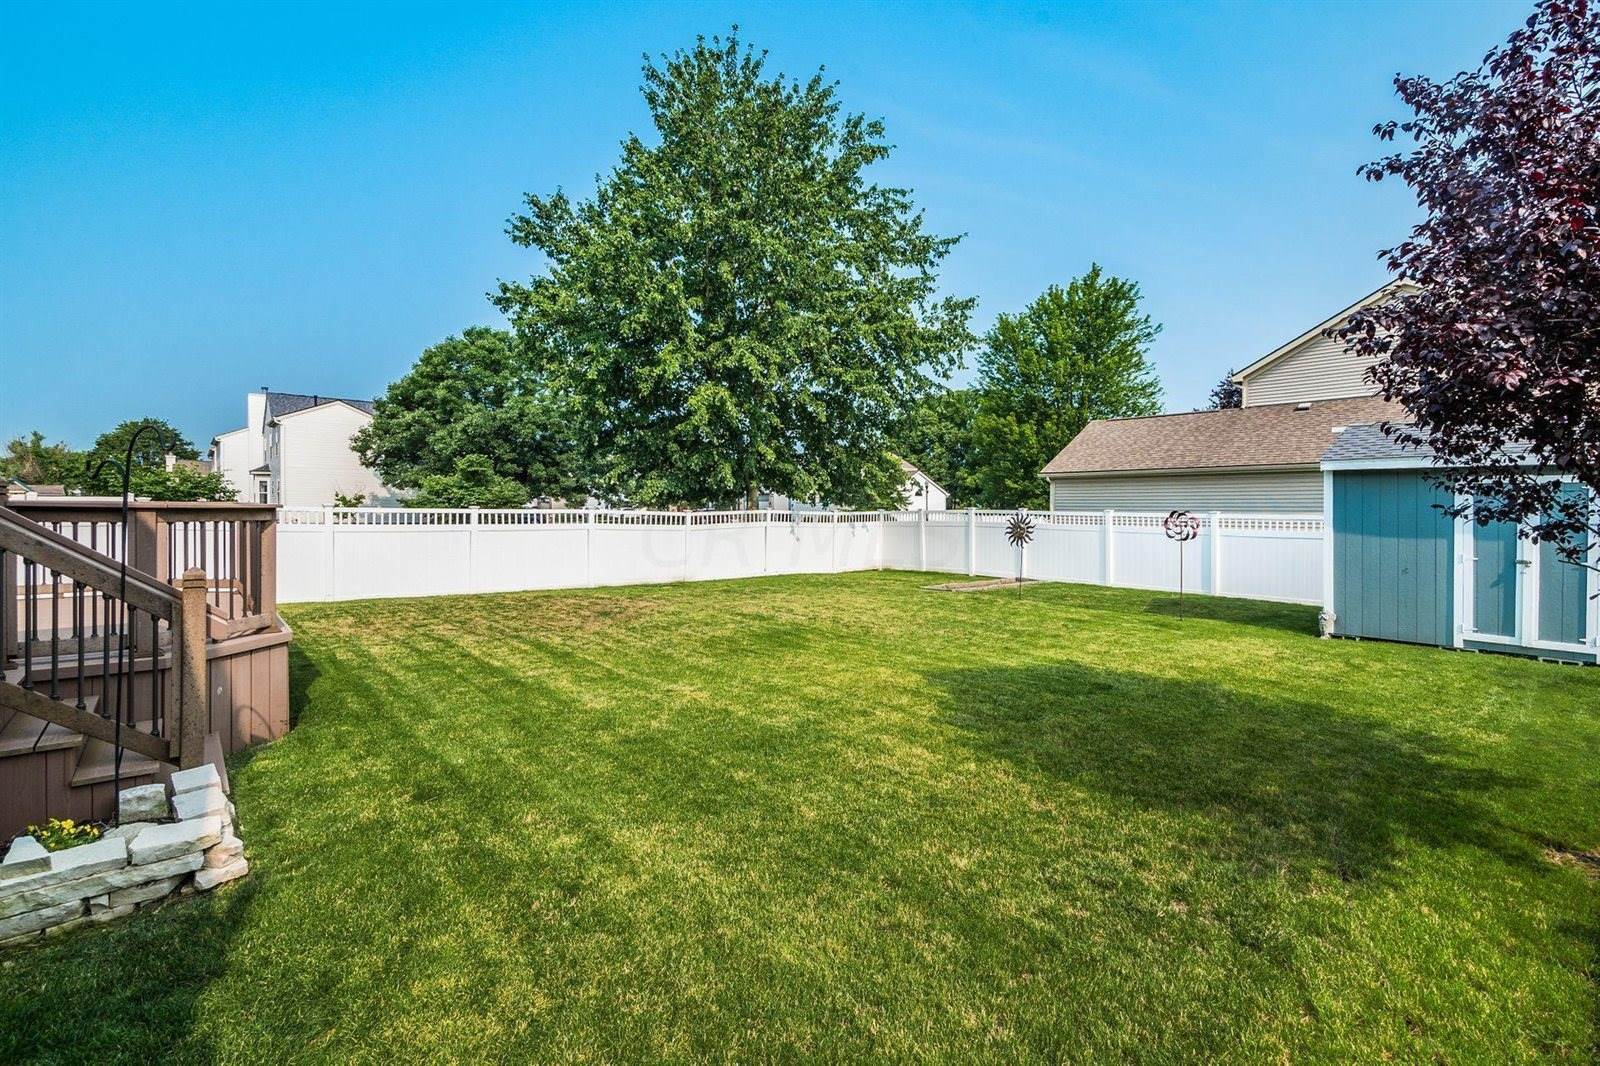 3075 Andrew James Drive, Hilliard, OH 43026